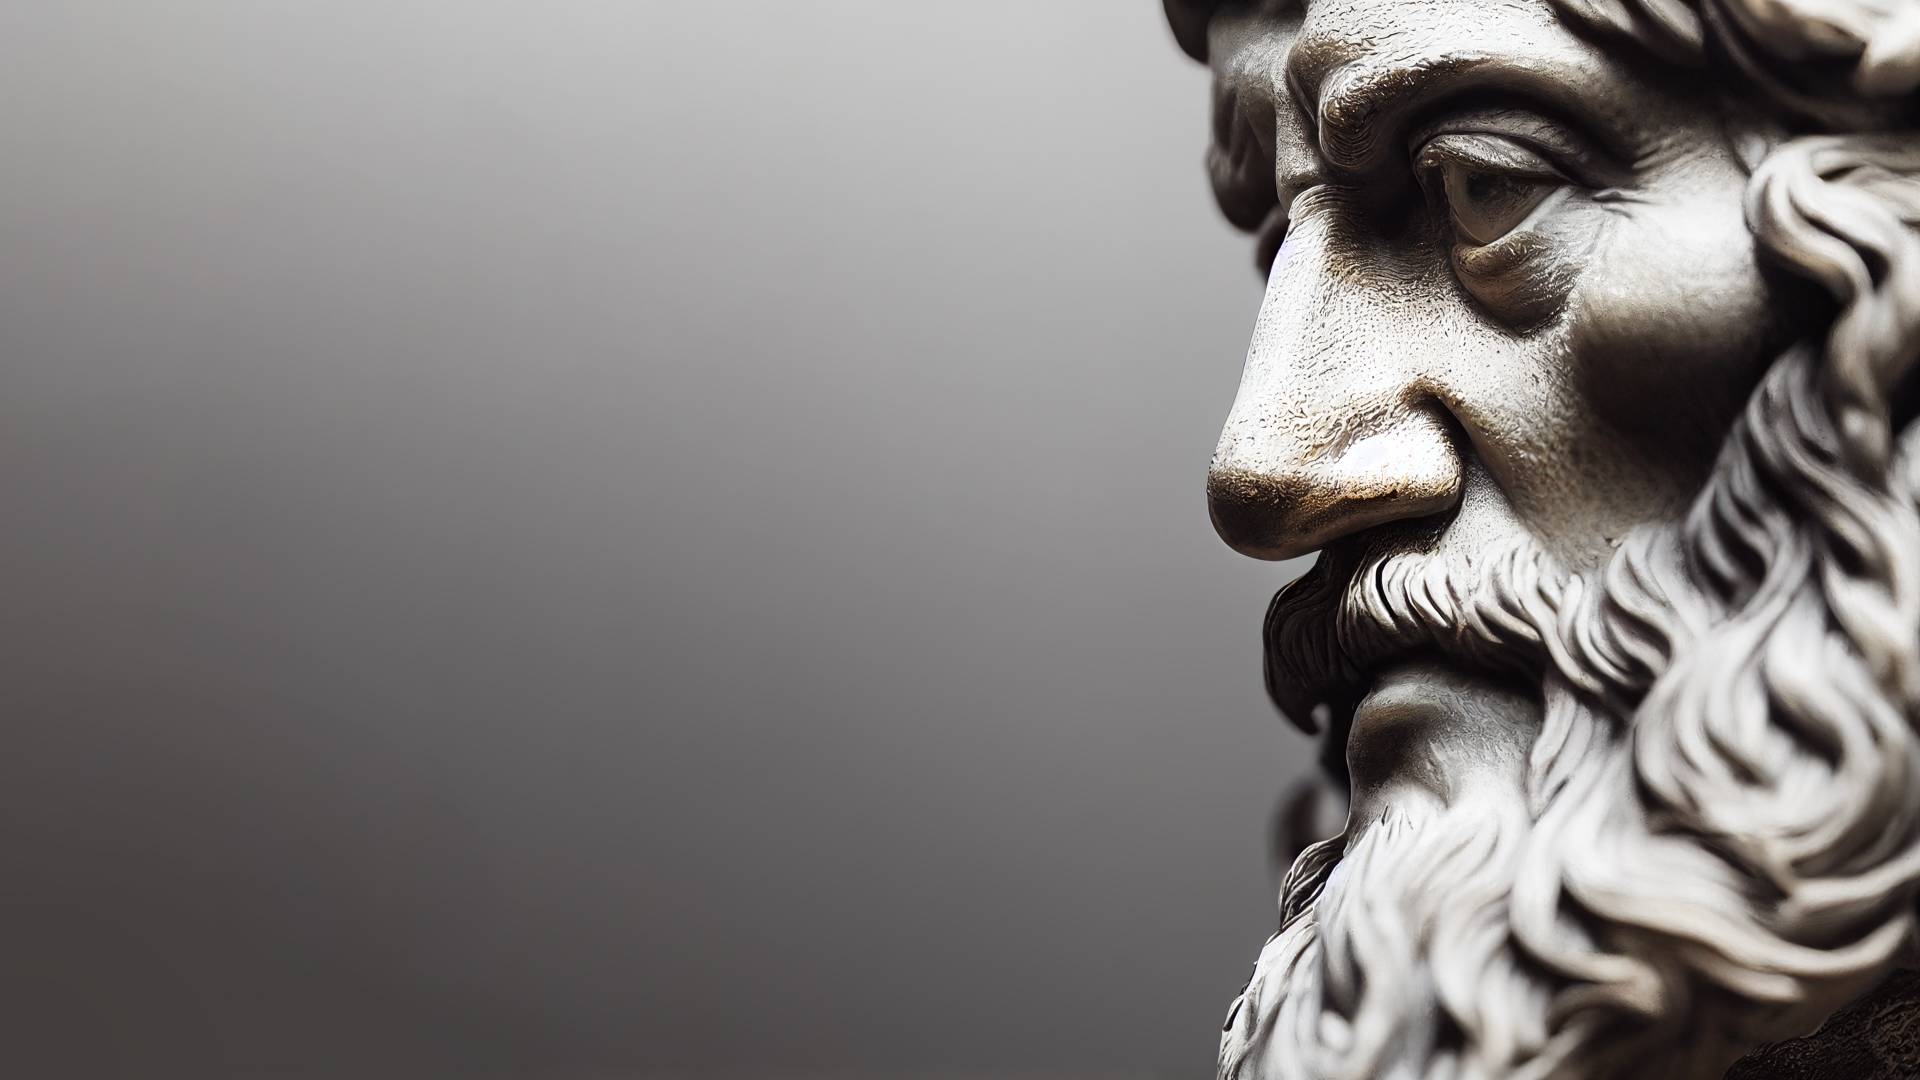 From Aristotle to austerity